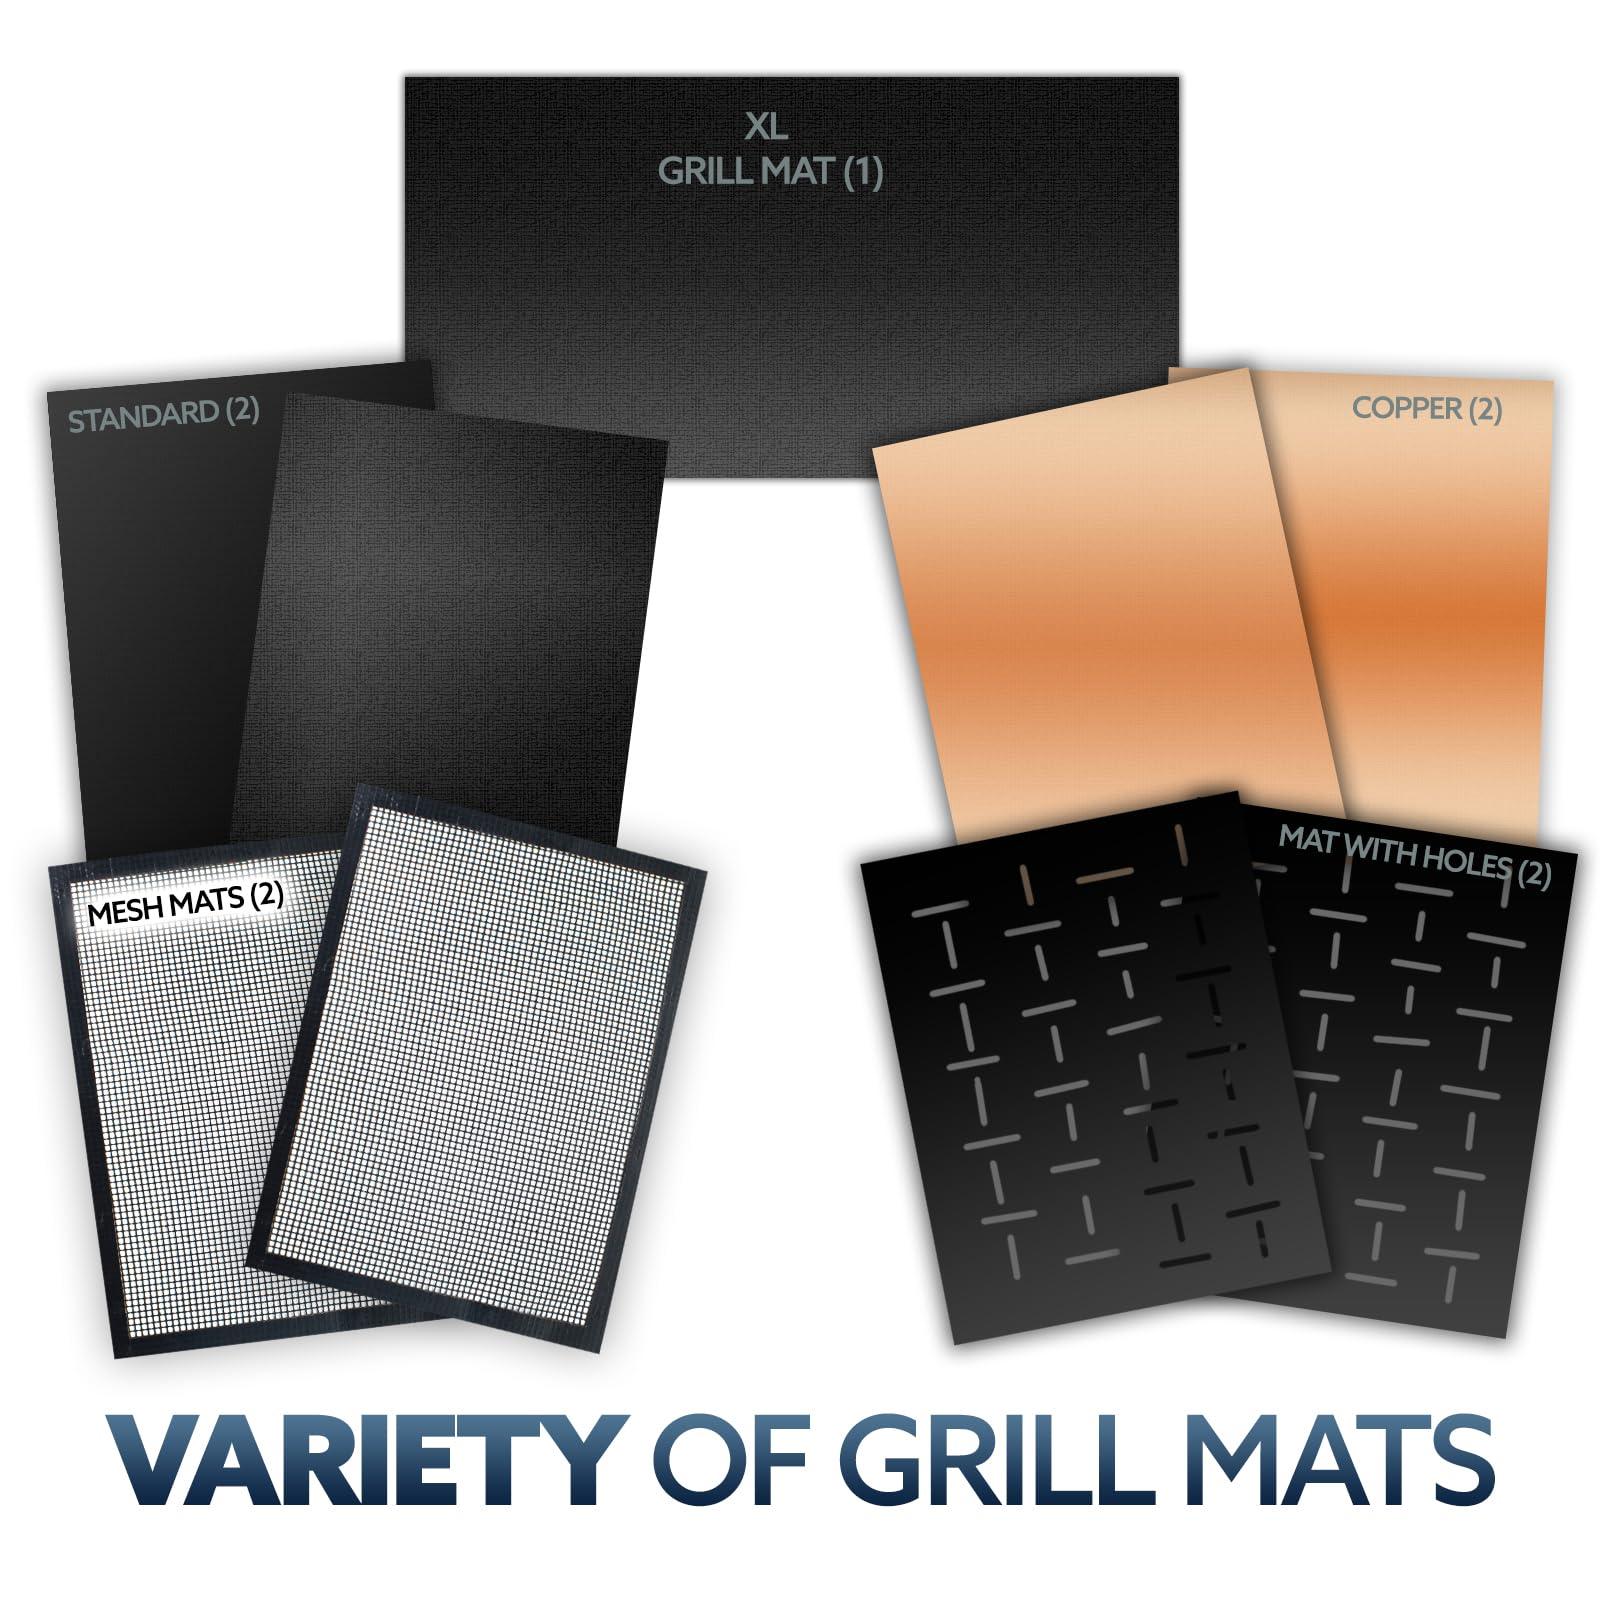 Kona Best BBQ Grill Mat - Heavy Duty 600 Degree Non-Stick Grill Mats for Outdoor Grilling | Premier BBQ Grill Accessories Nonstick Grill Matt (Set of 2) Engineered in The USA | 7-Year Warranty - CookCave